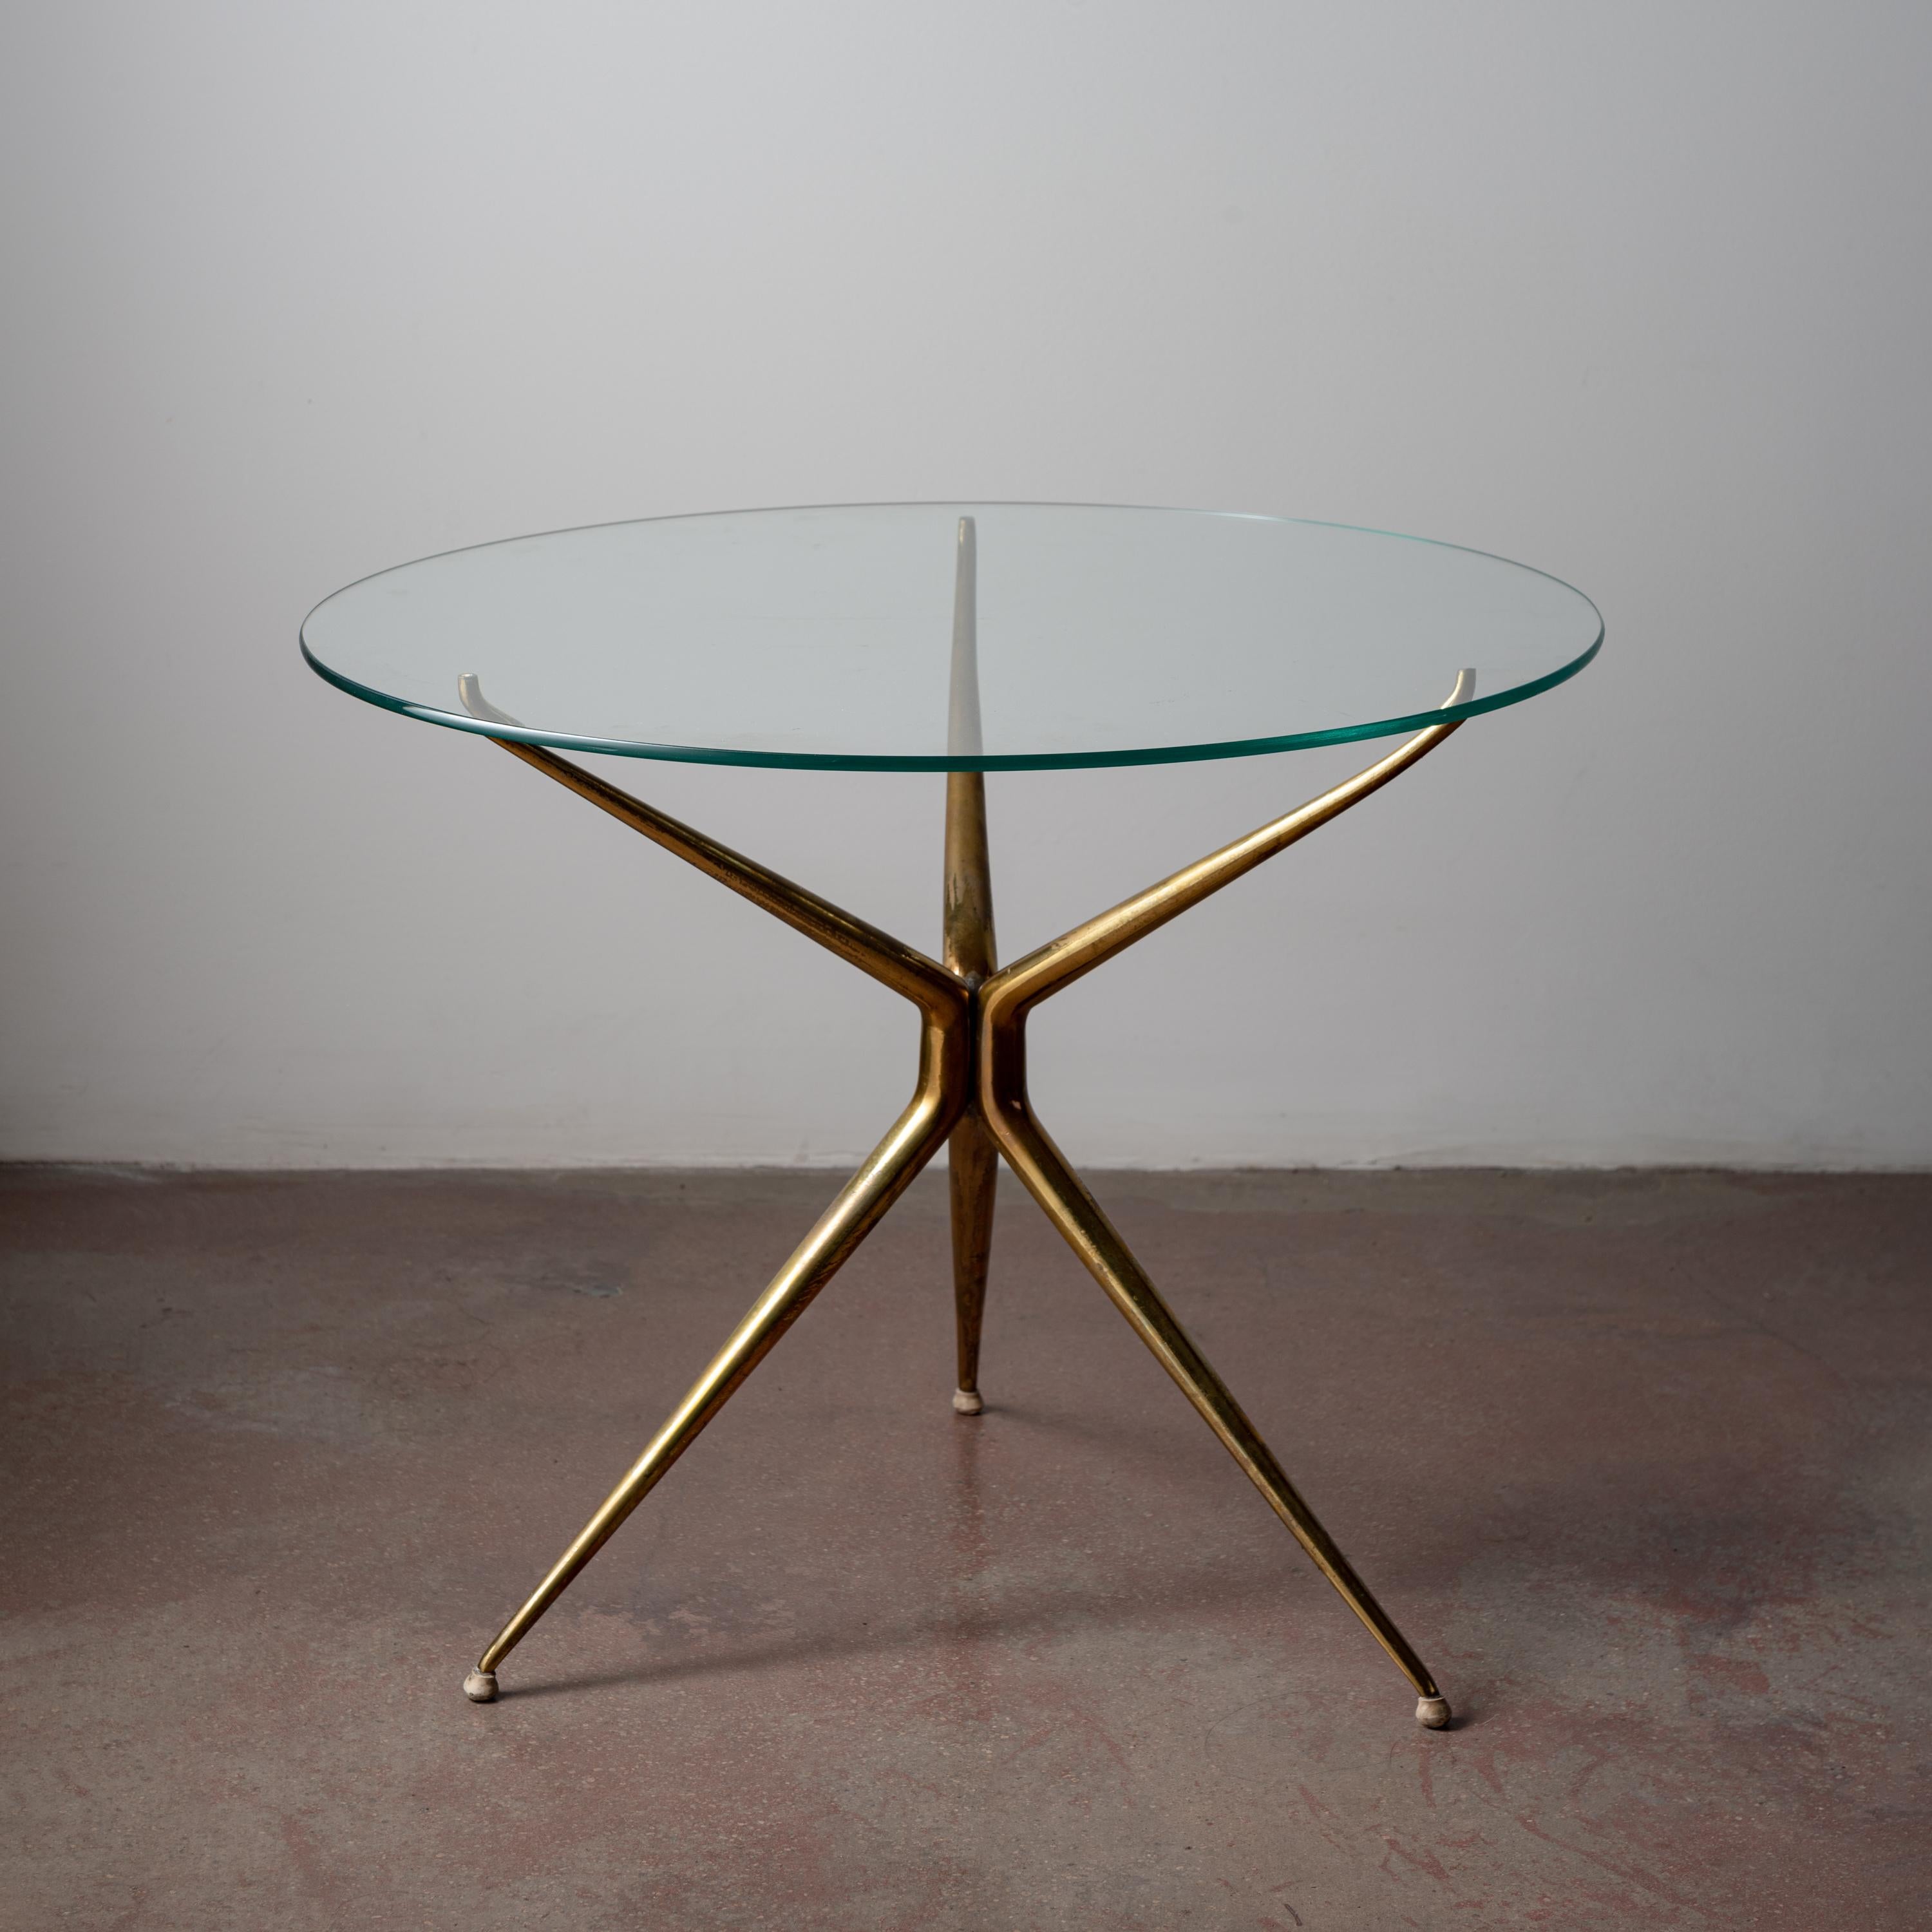 Brass and glass tripod side table. Made in Italy circa 1960s.